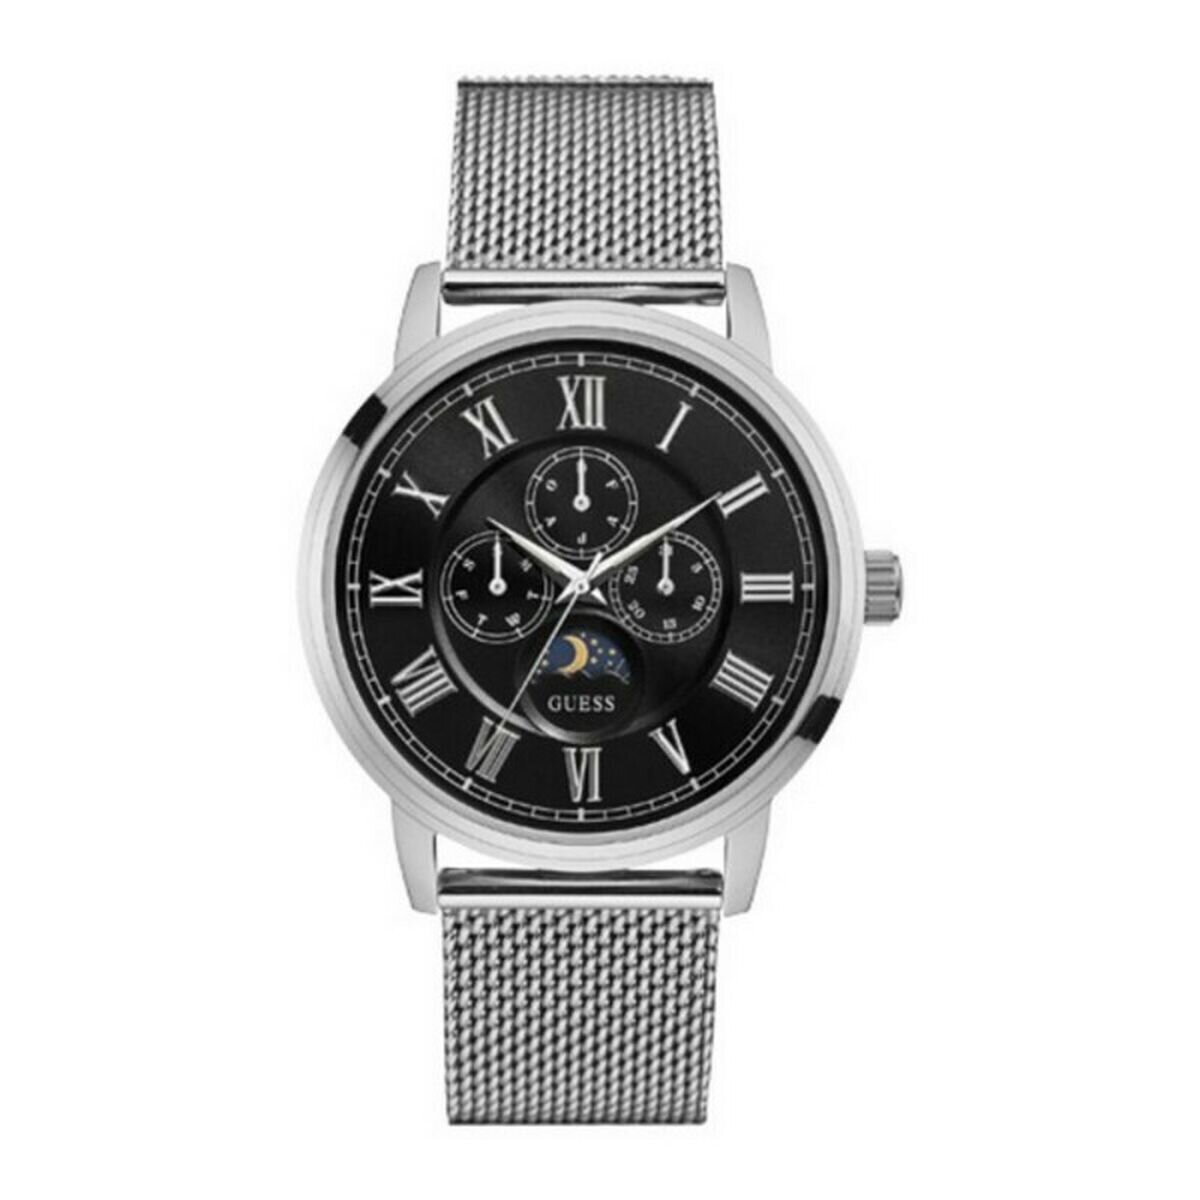 Men's black and silver Guess Watch